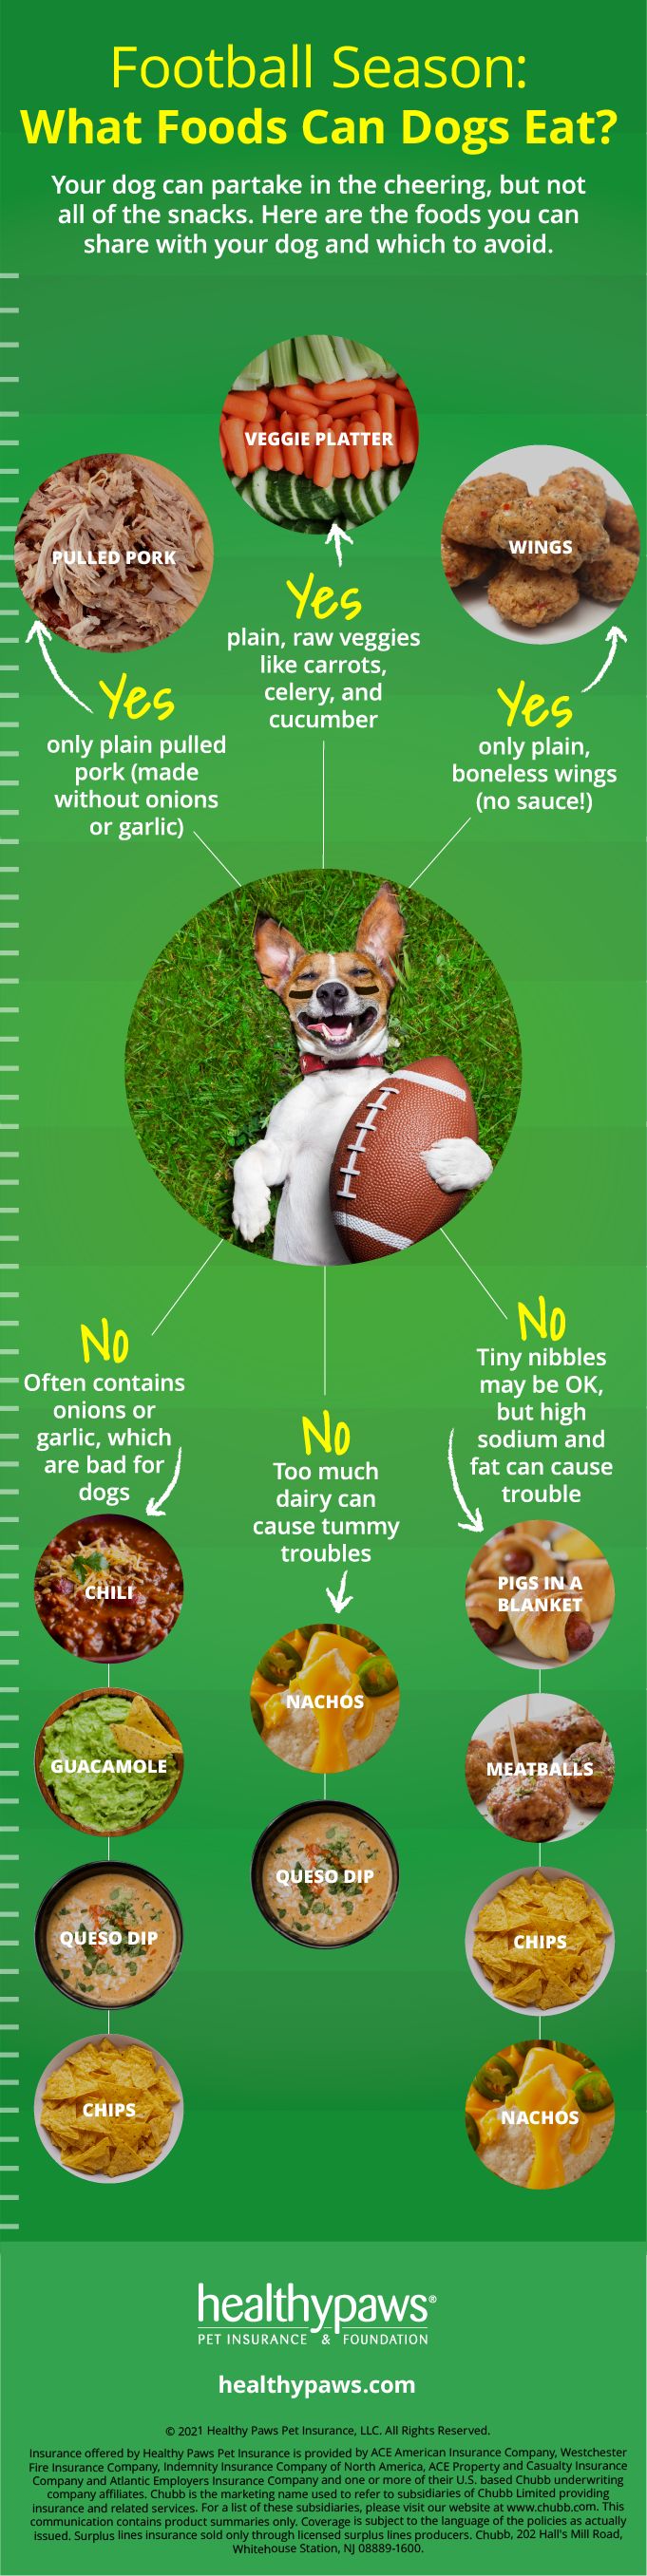 football foods dogs can eat